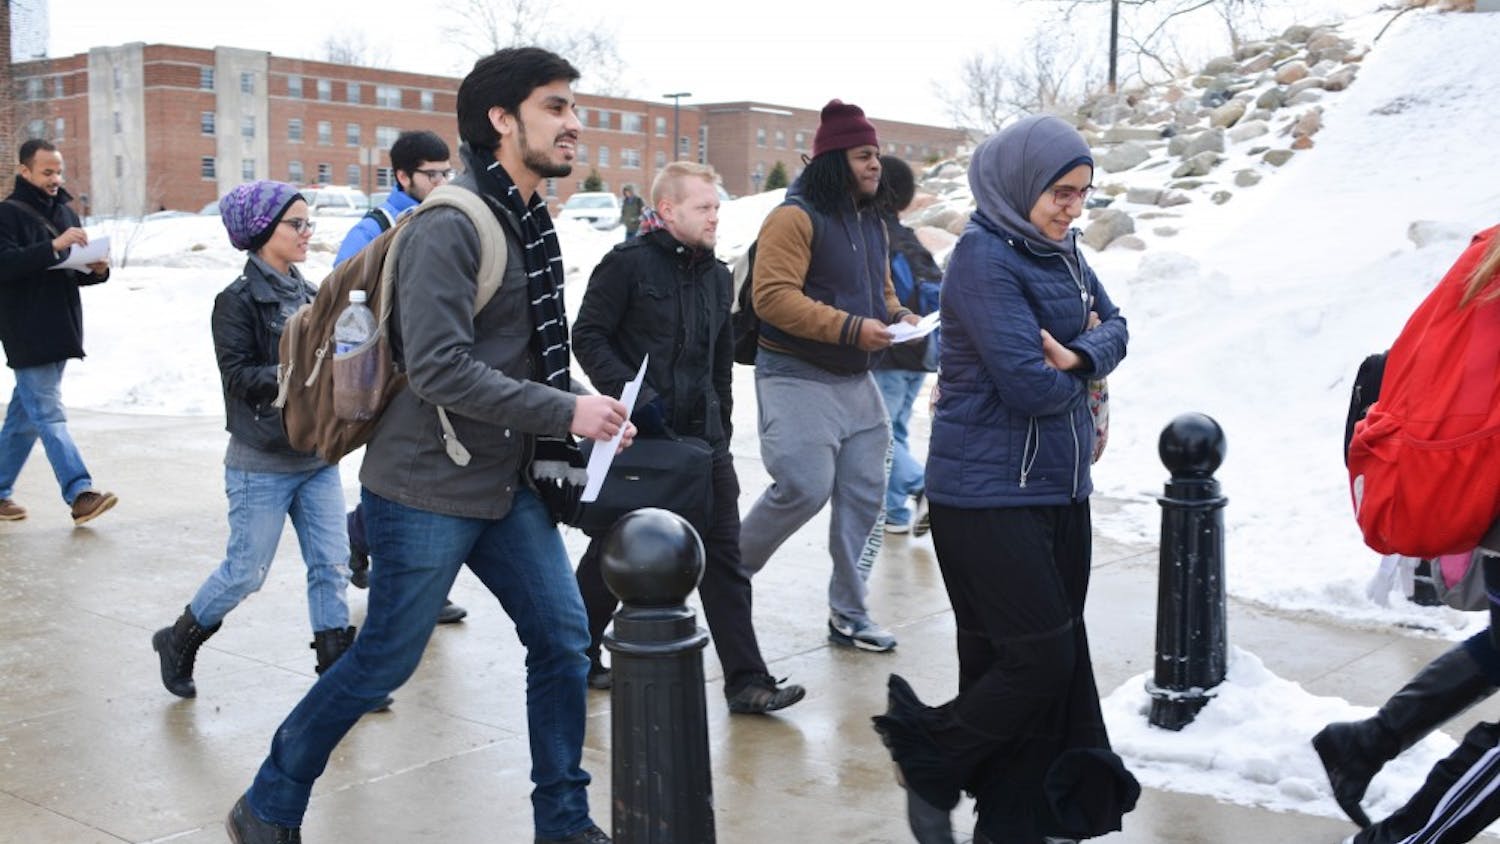 EMU students begin the second walk of the weeklong #Walkwithme protest on Feb 18, 2015 on Eastern Michigan University's campus.